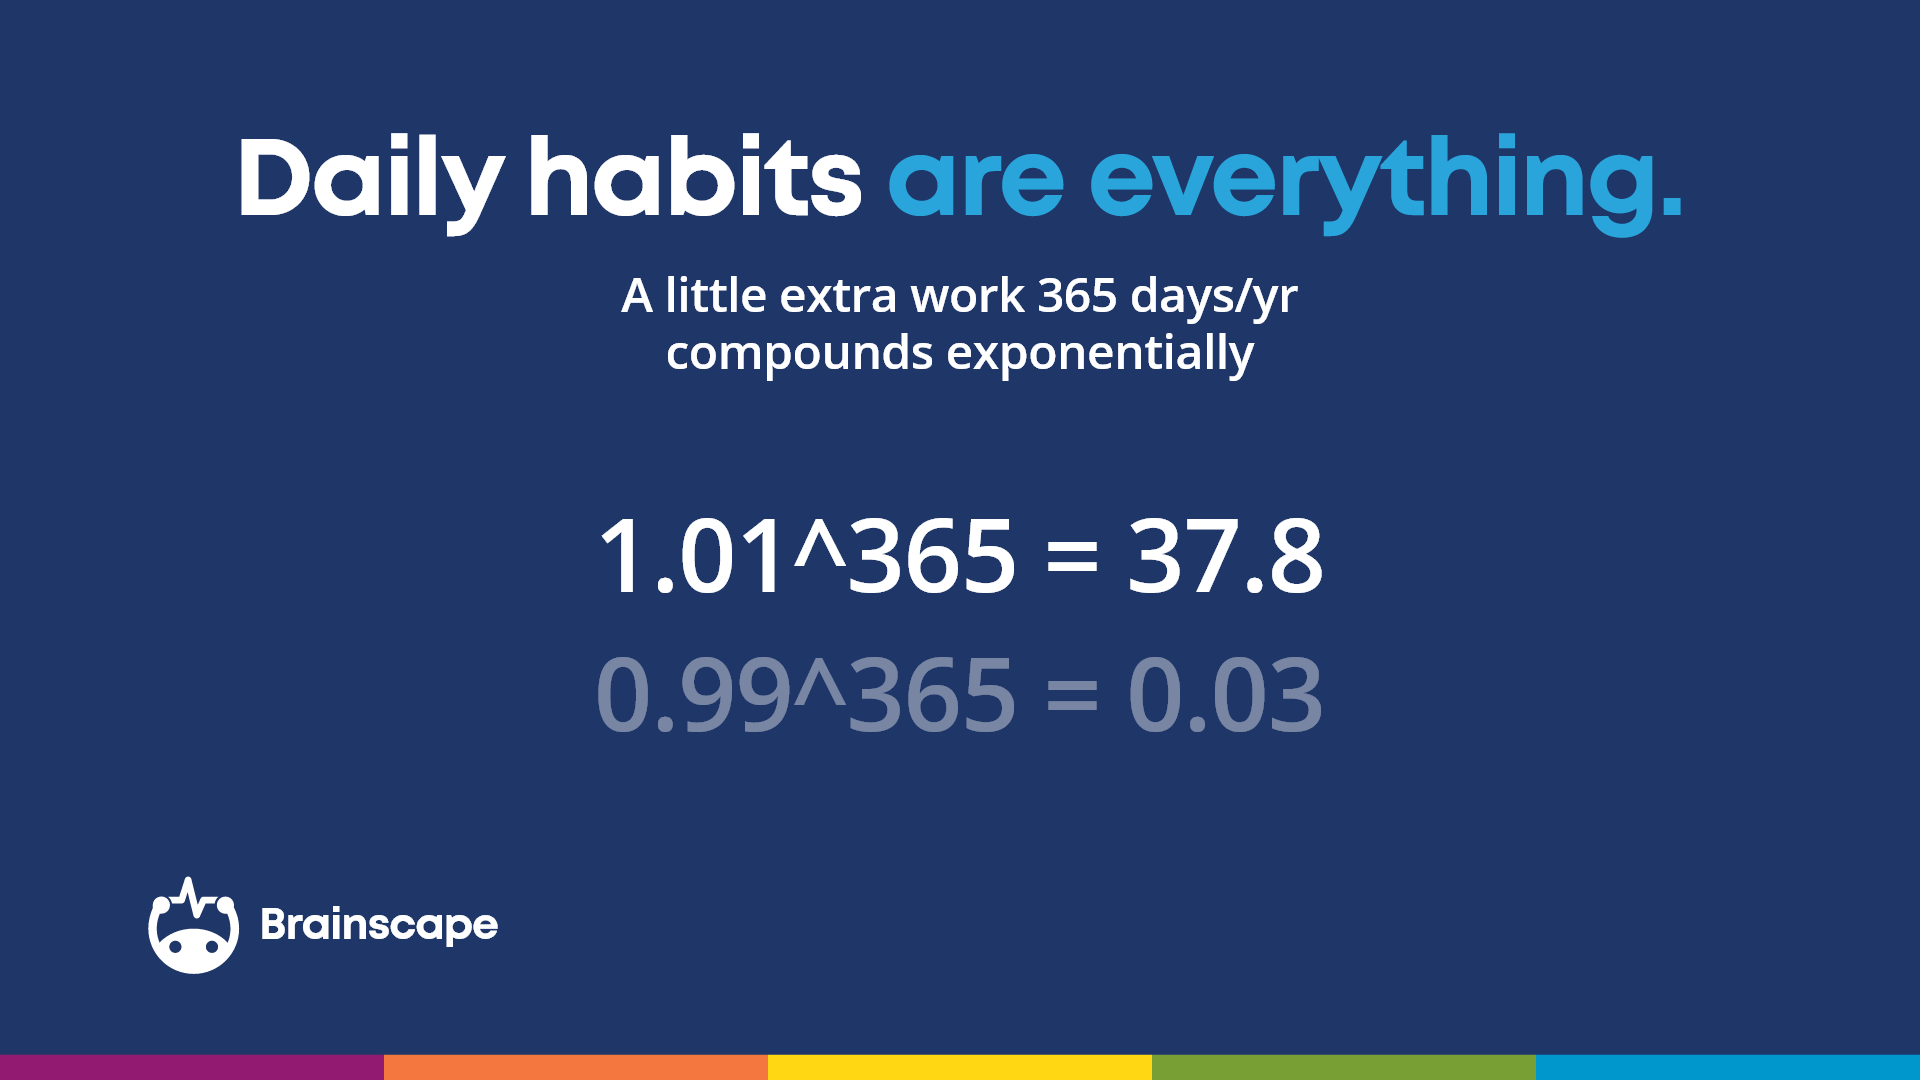 Habit equation which shows just a little bit compounding every day adds up to a lot over the course of a year.